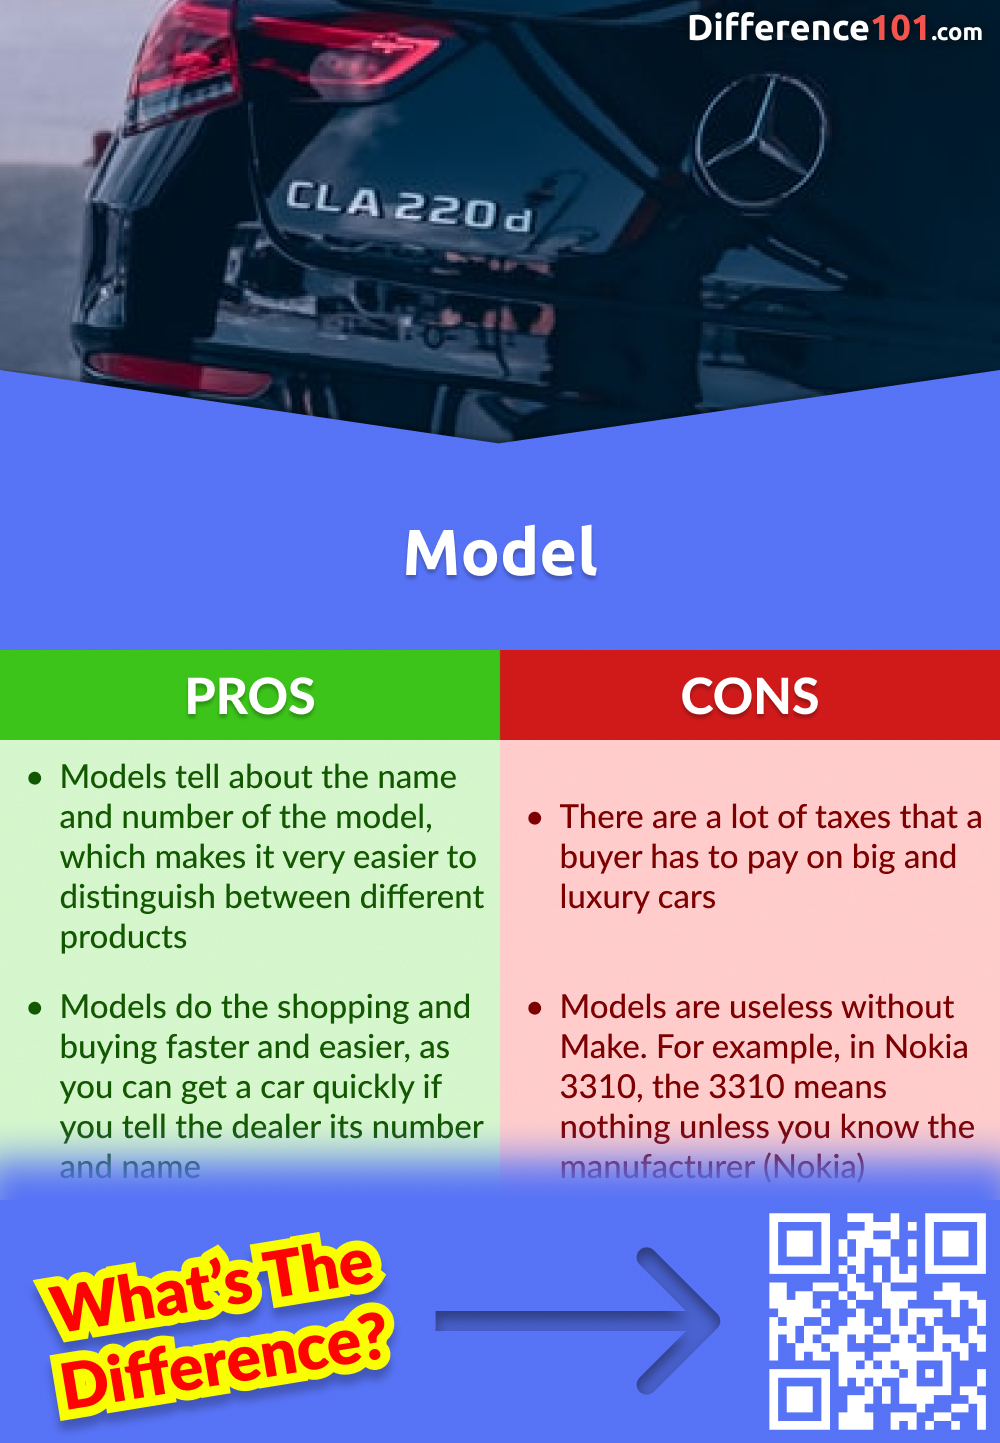 Pros and cons of the Model